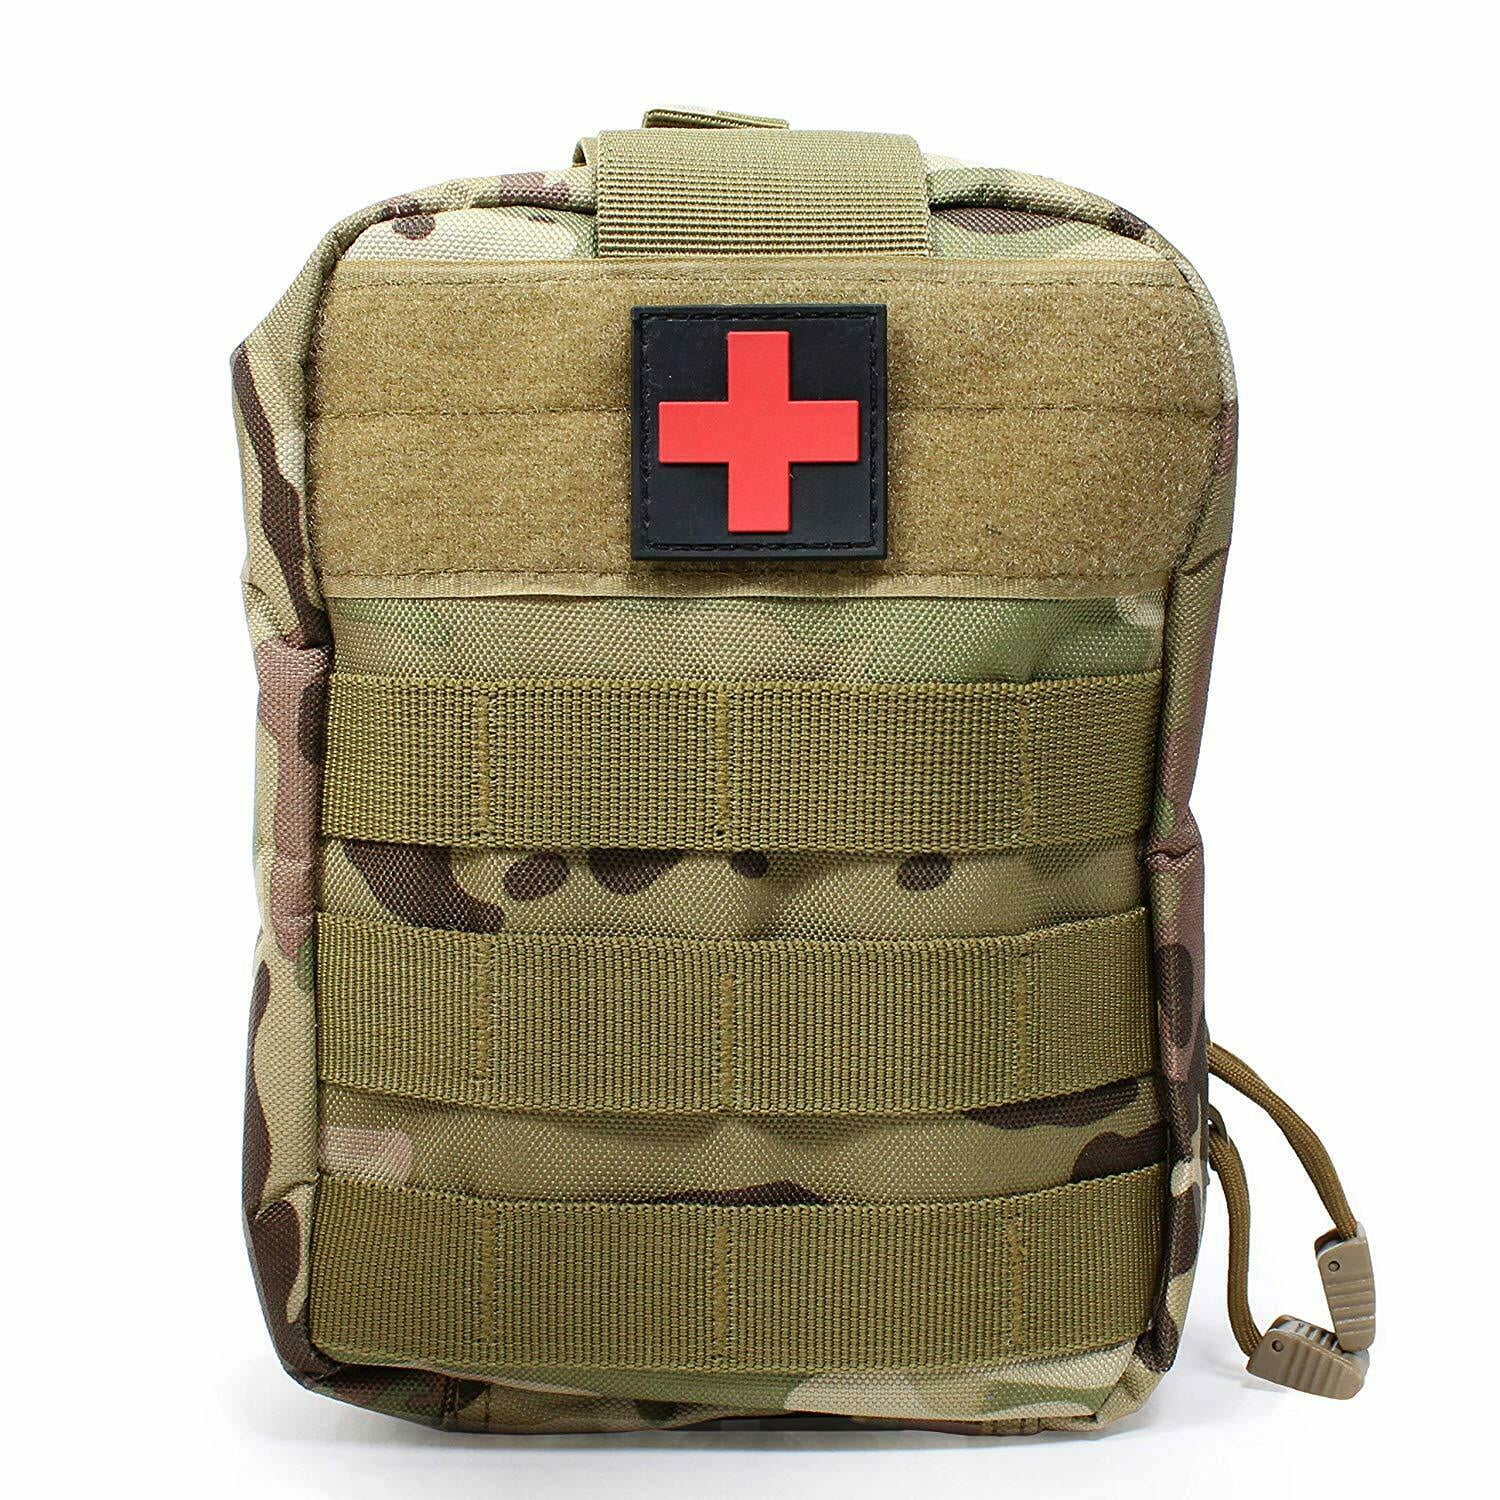 USA Made GI Used USMC IFAK First Aid Kit/Utility Nylon Pouch MOLLE Compatible 